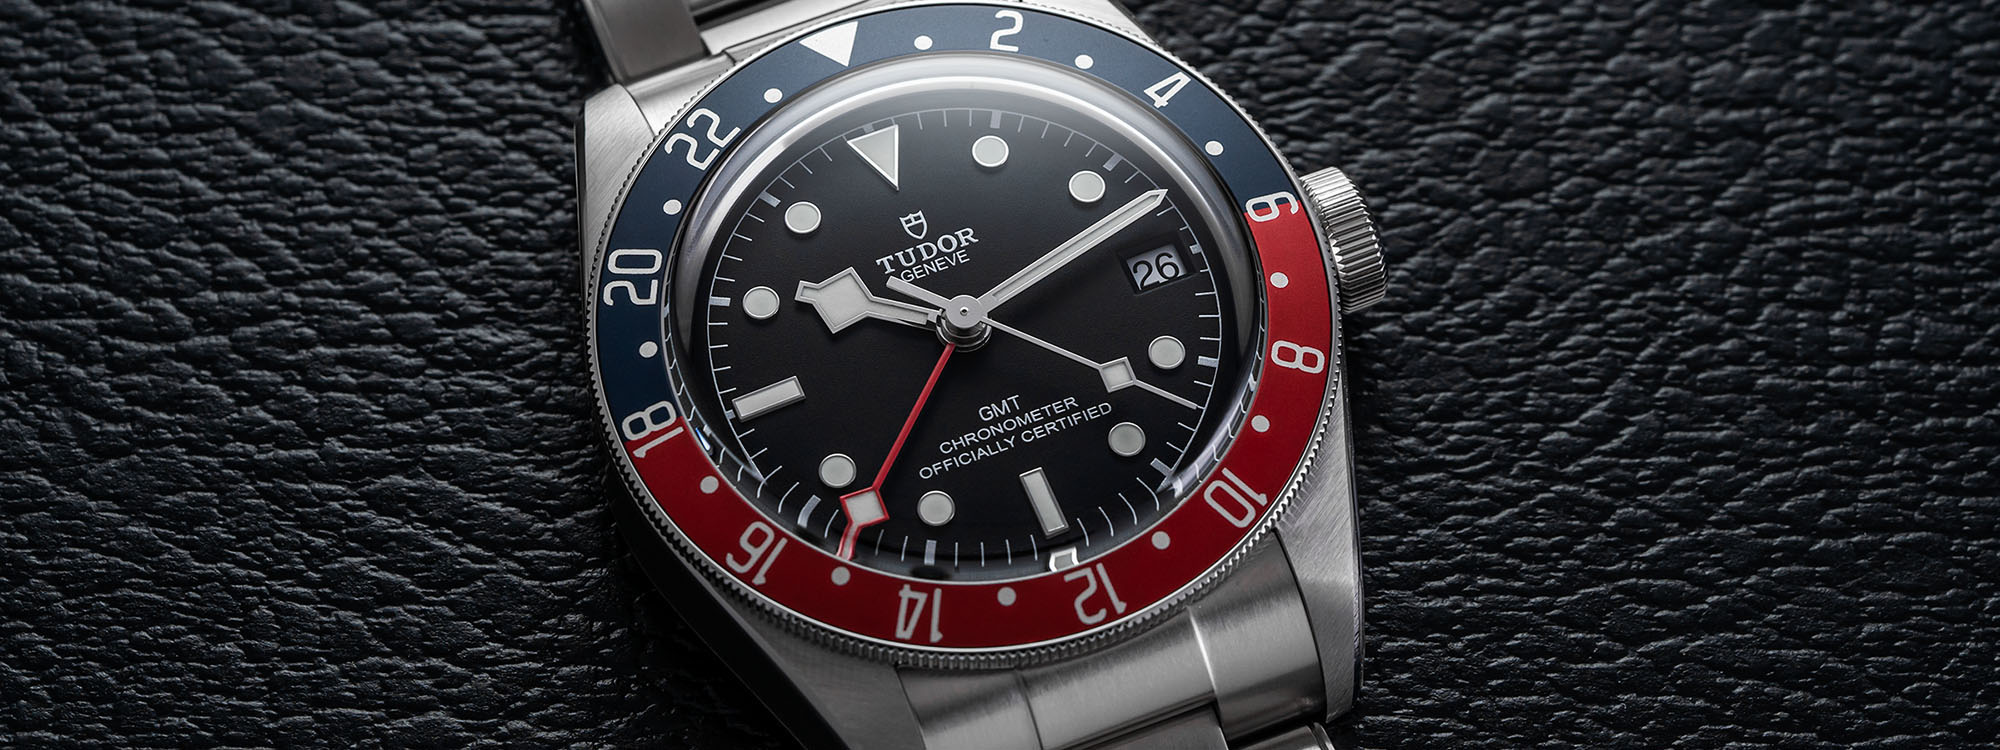 Powered by a new three-day movement, a mechanical GMT diver's